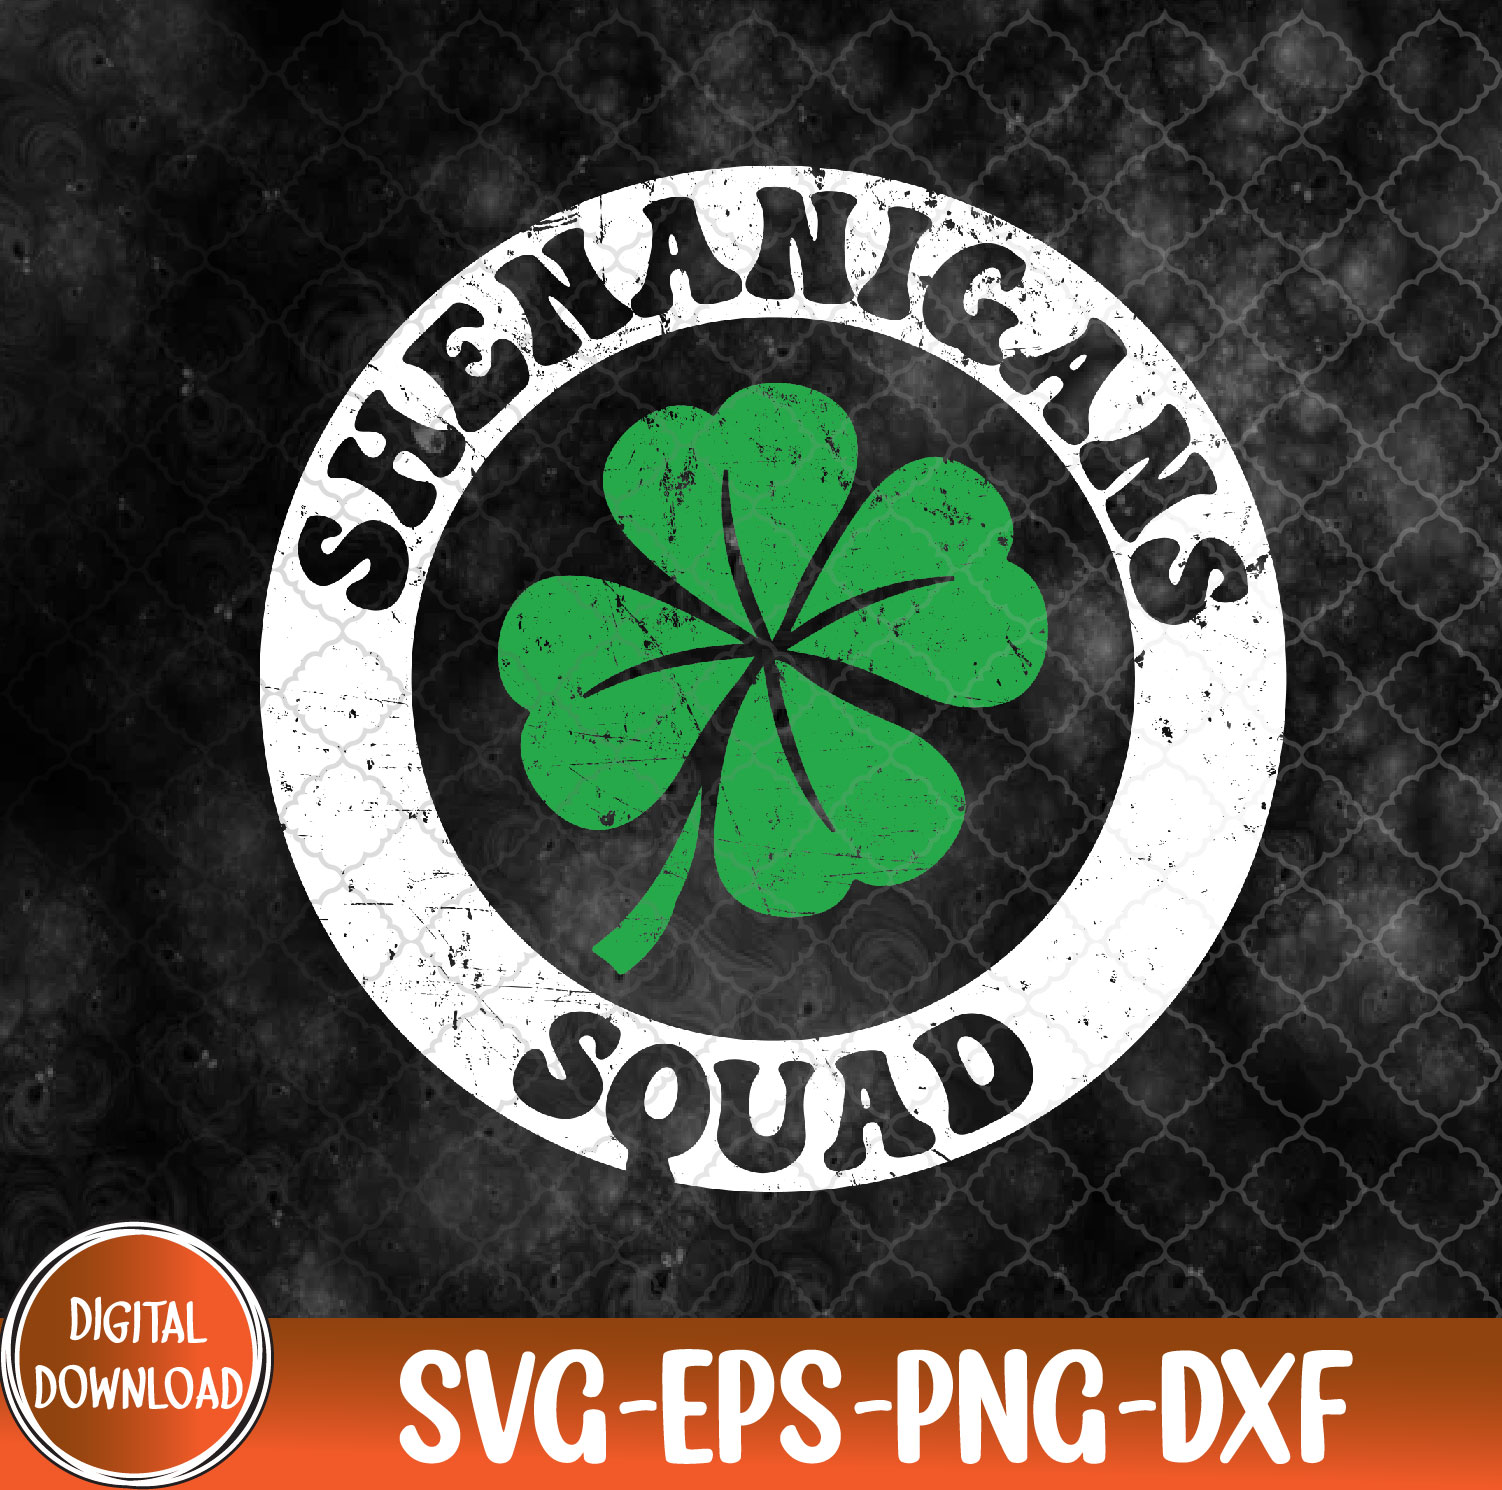 WTMNEW9file 09 206 Shenanigans Squad Funny St Patrick's Day Matching Group Svg, Eps, Png, Dxf